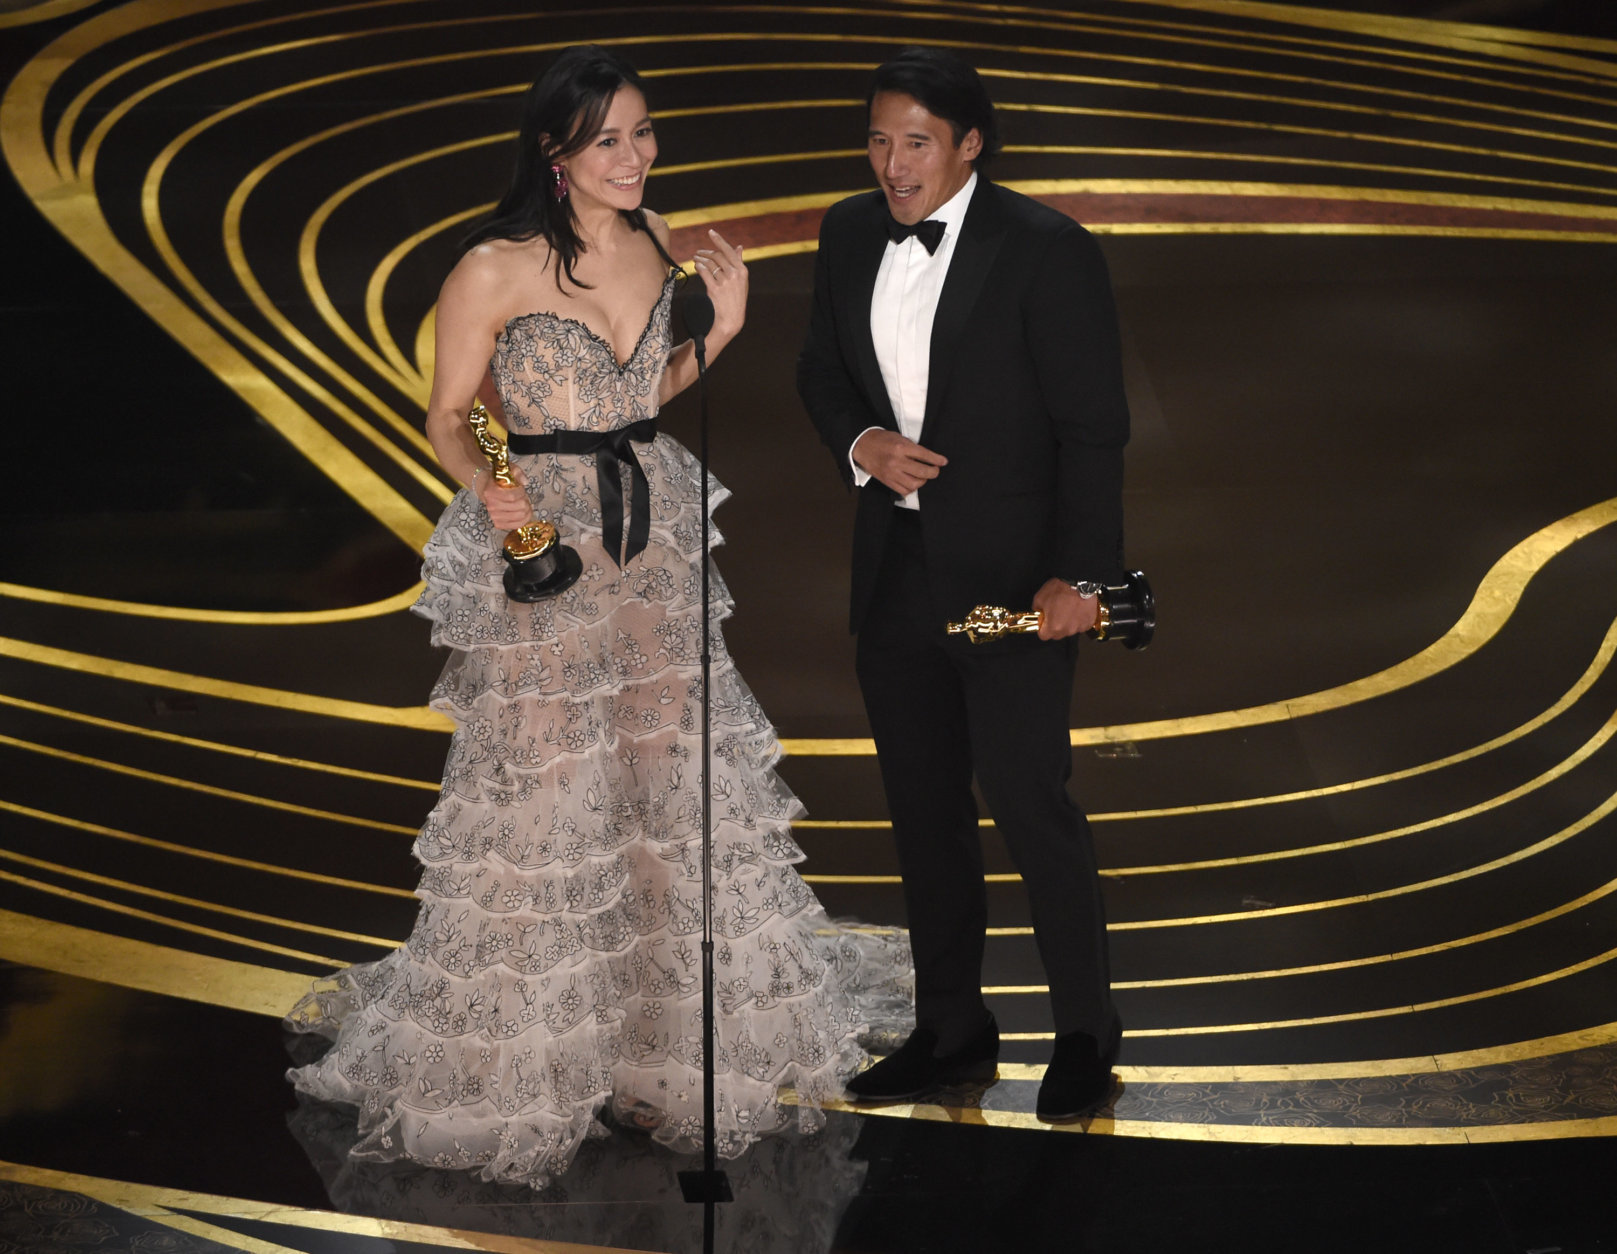 Elizabeth Chai Vasarhelyi, left, and Jimmy Chin accept the award for best documentary feature for "Free Solo" at the Oscars on Sunday, Feb. 24, 2019, at the Dolby Theatre in Los Angeles. (Photo by Chris Pizzello/Invision/AP)